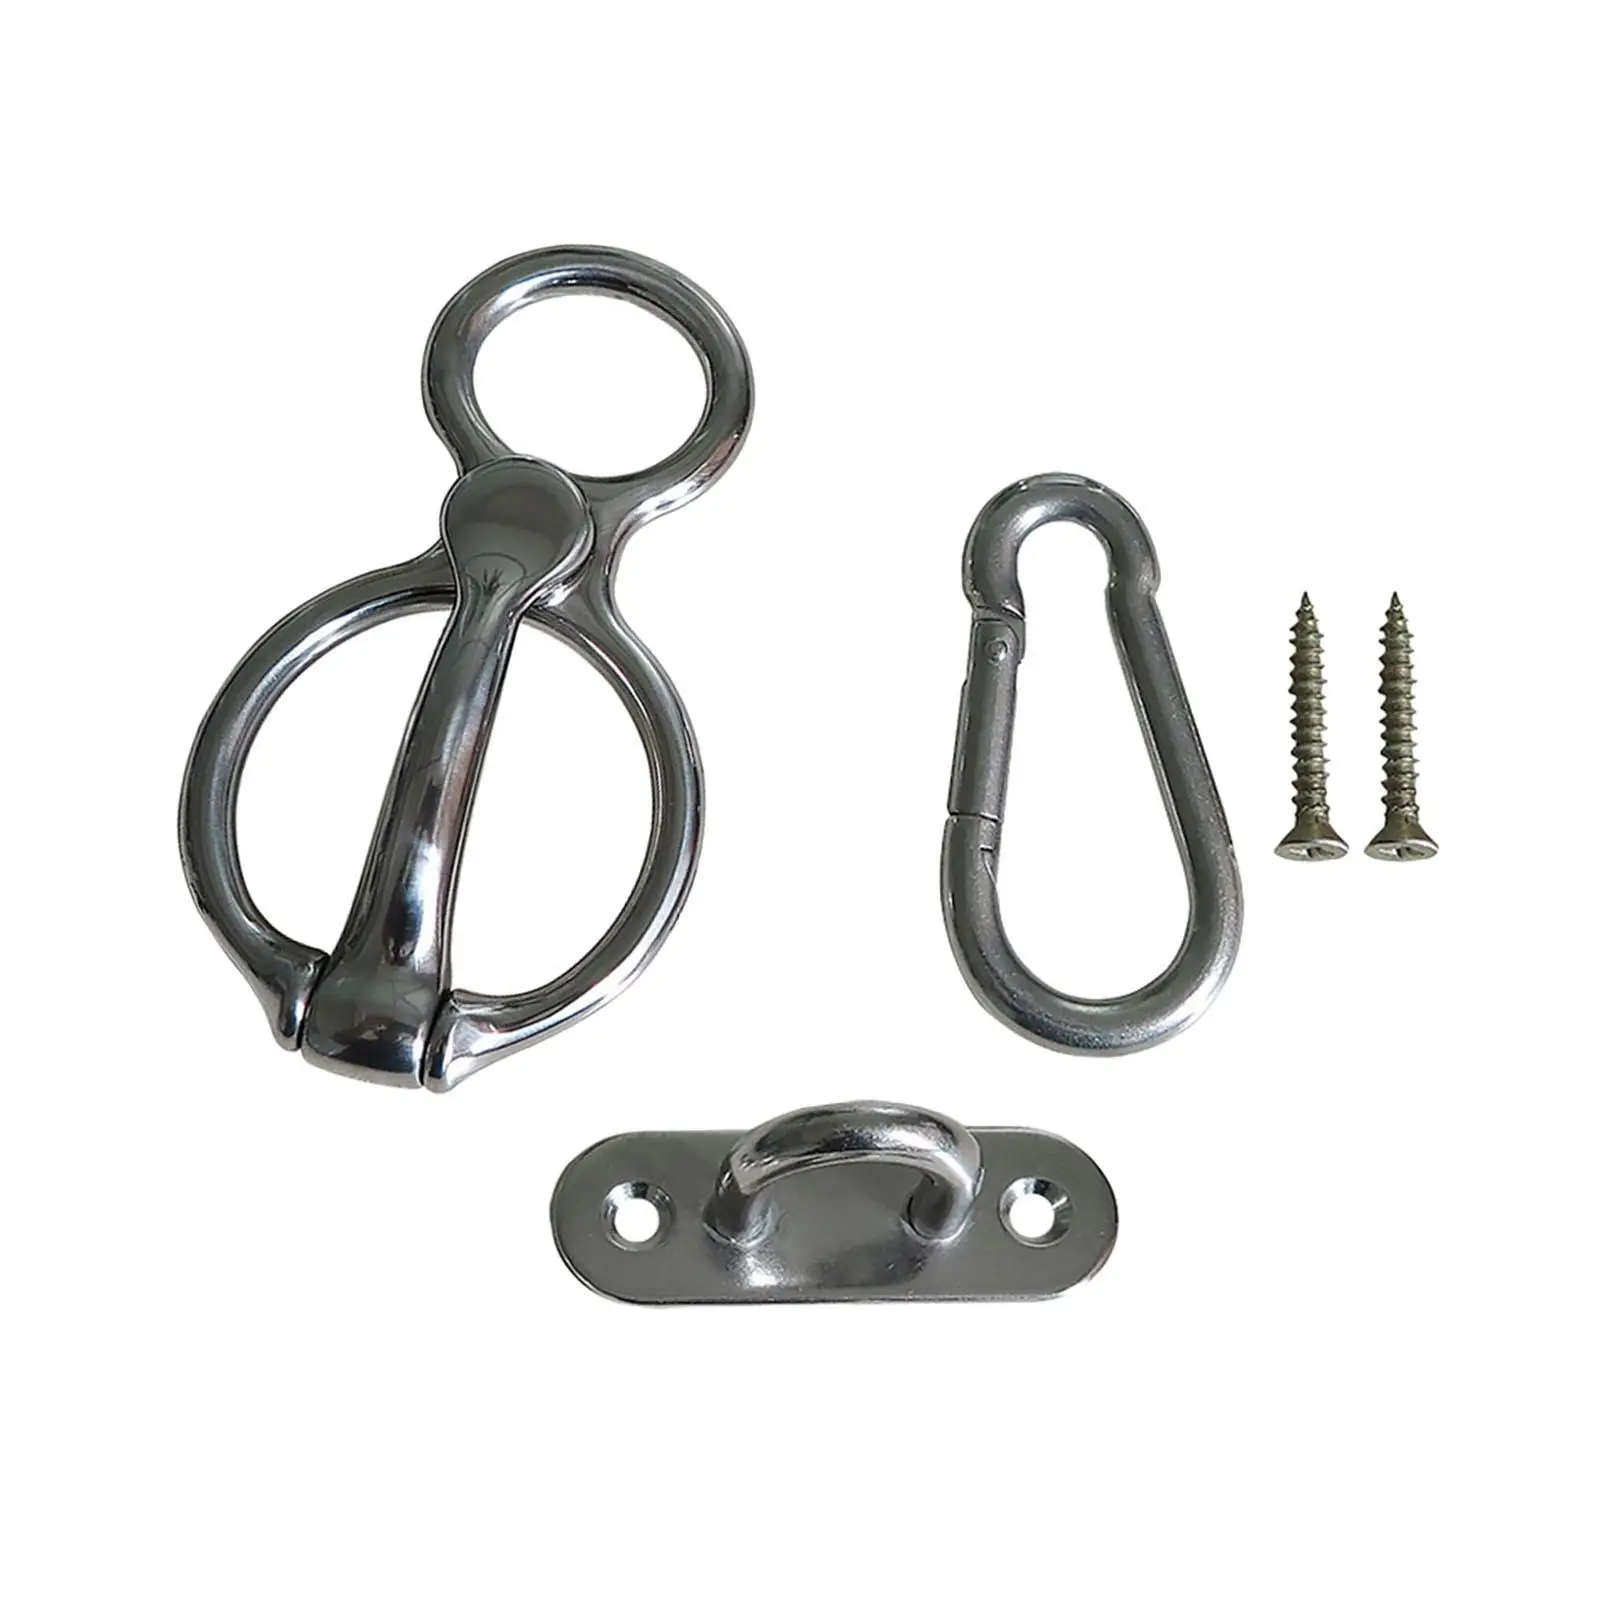 Horse Tie Ring Outdoor Sports Prevent Horses from Pulling Back Fasteners with Eye Bolt Horse Tack Supplies Safety Accessories